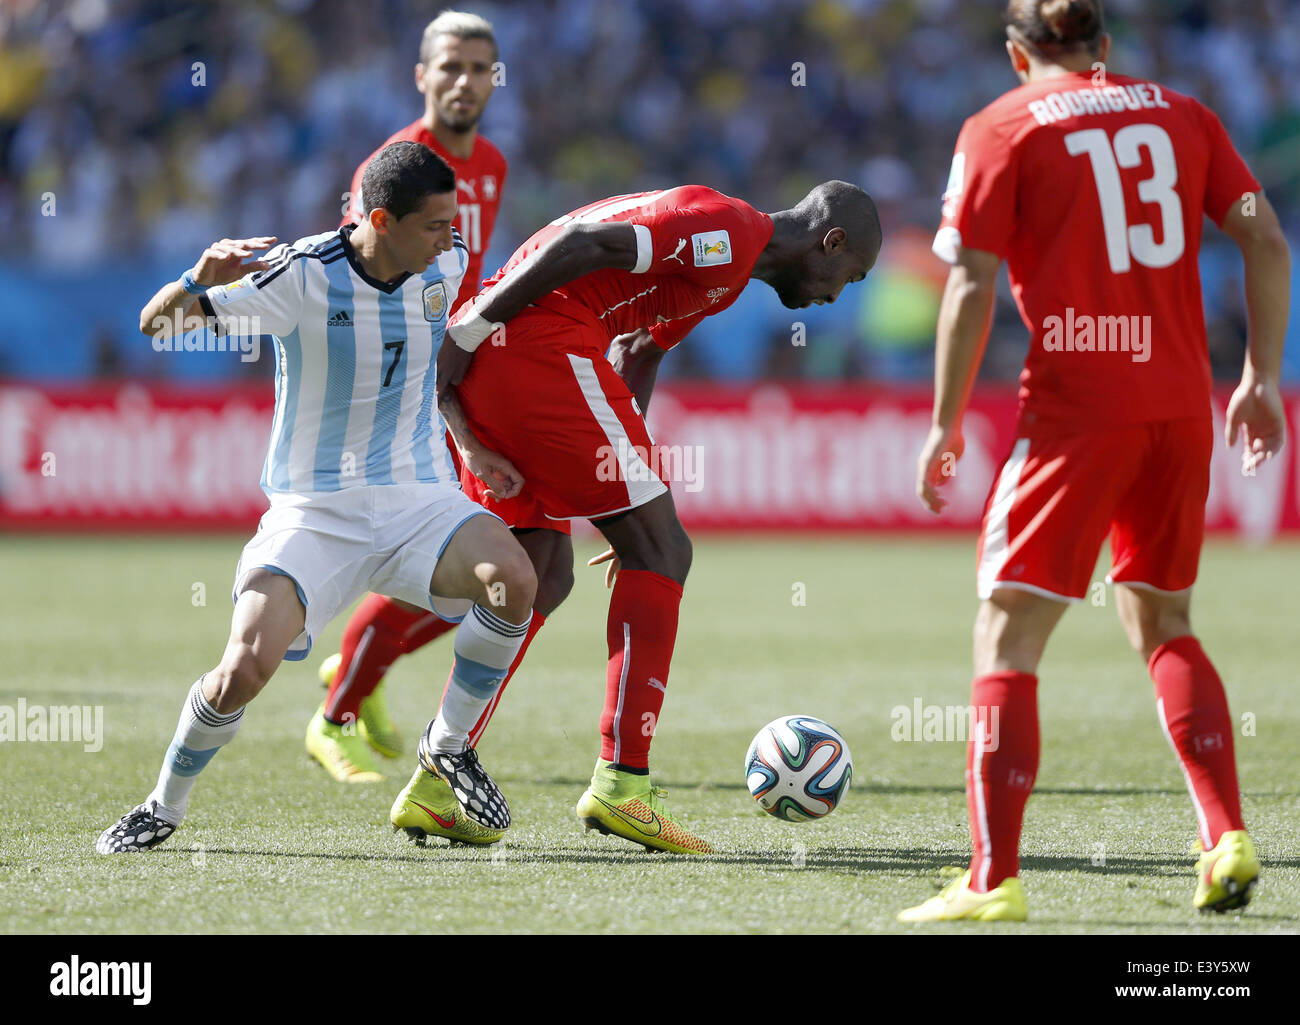 Sao Paulo, Brazil. 1st July, 2014. Argentina's Angel Di Maria (L) vies with Switzerland's Johan Djourou (2nd R) during a Round of 16 match between Argentina and Switzerland of 2014 FIFA World Cup at the Arena de Sao Paulo Stadium in Sao Paulo, Brazil, on July 1, 2014. Credit:  Wang Lili/Xinhua/Alamy Live News Stock Photo